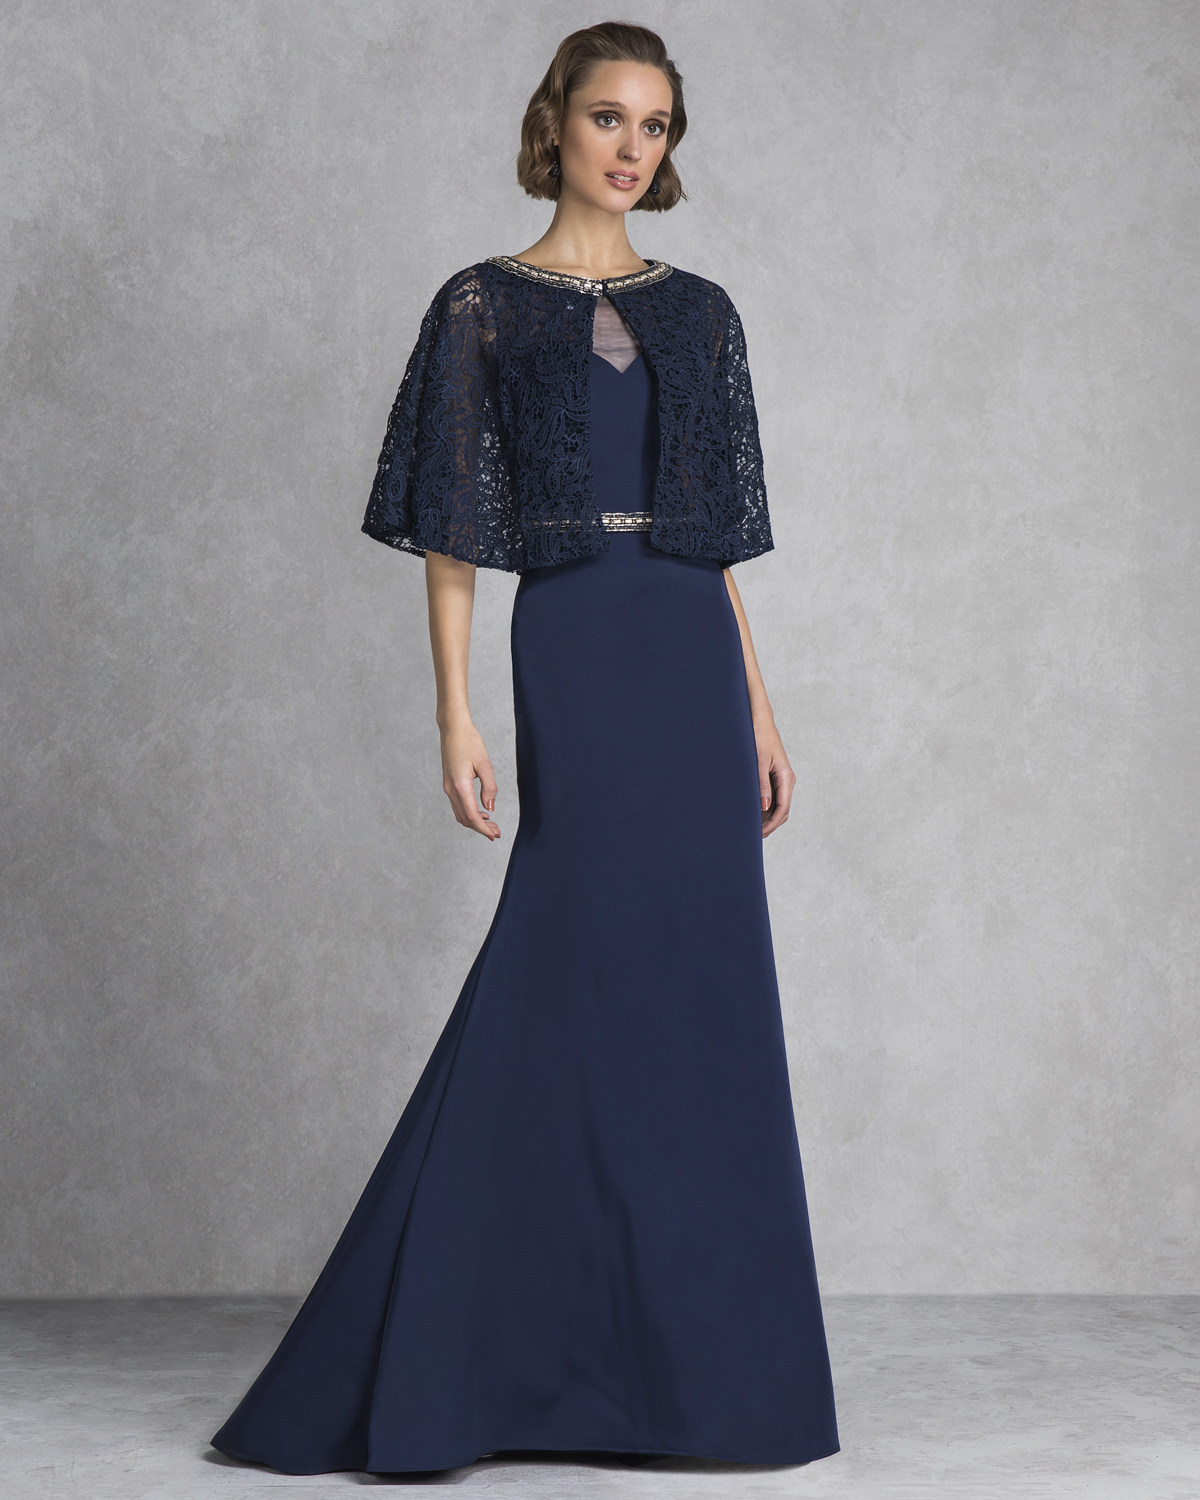 Long evening dress with beaded belt and bolero with lace